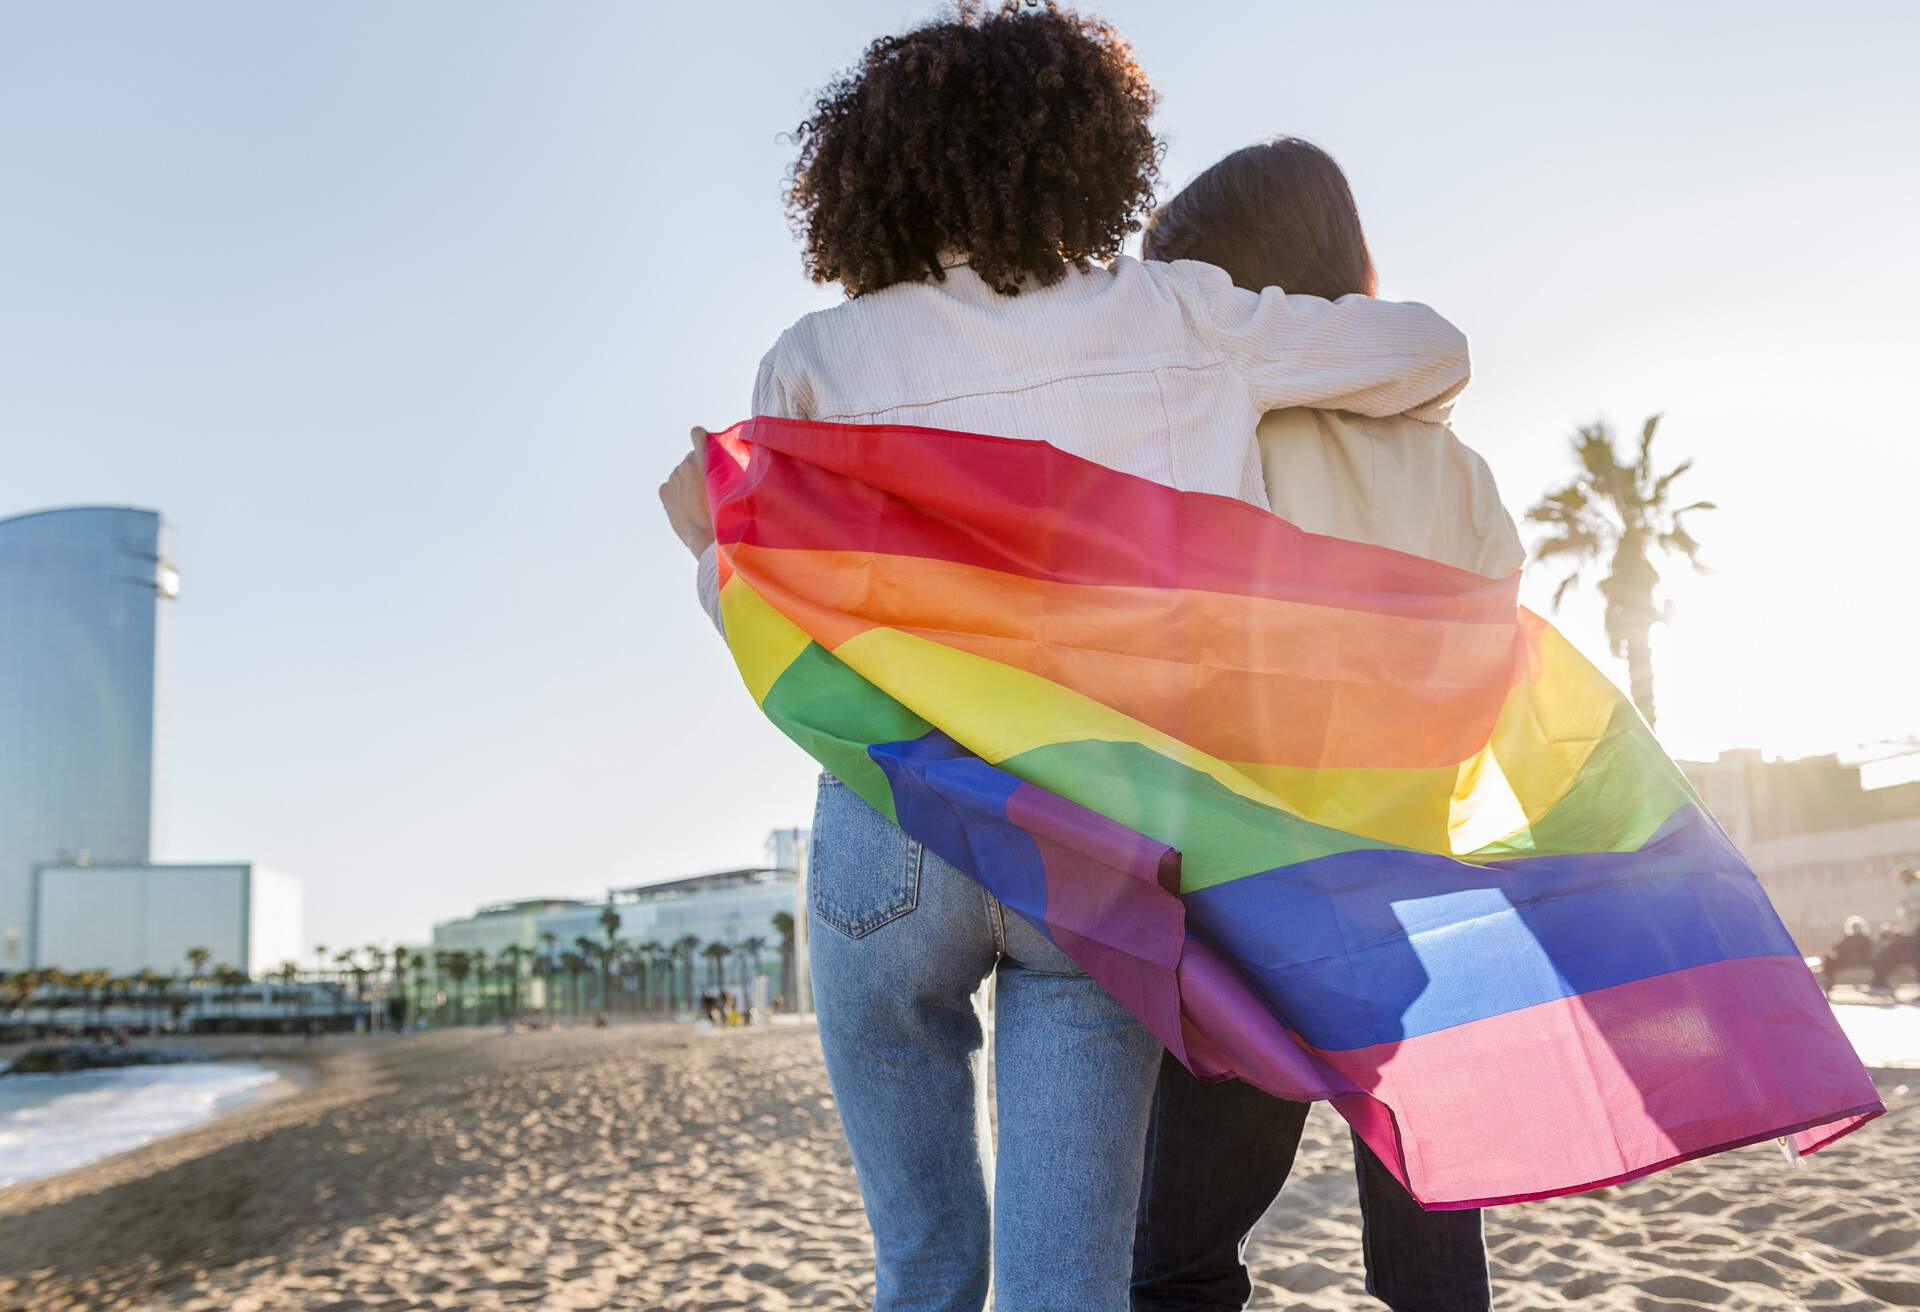 Two people shrouded in a Pride flag on the beach.